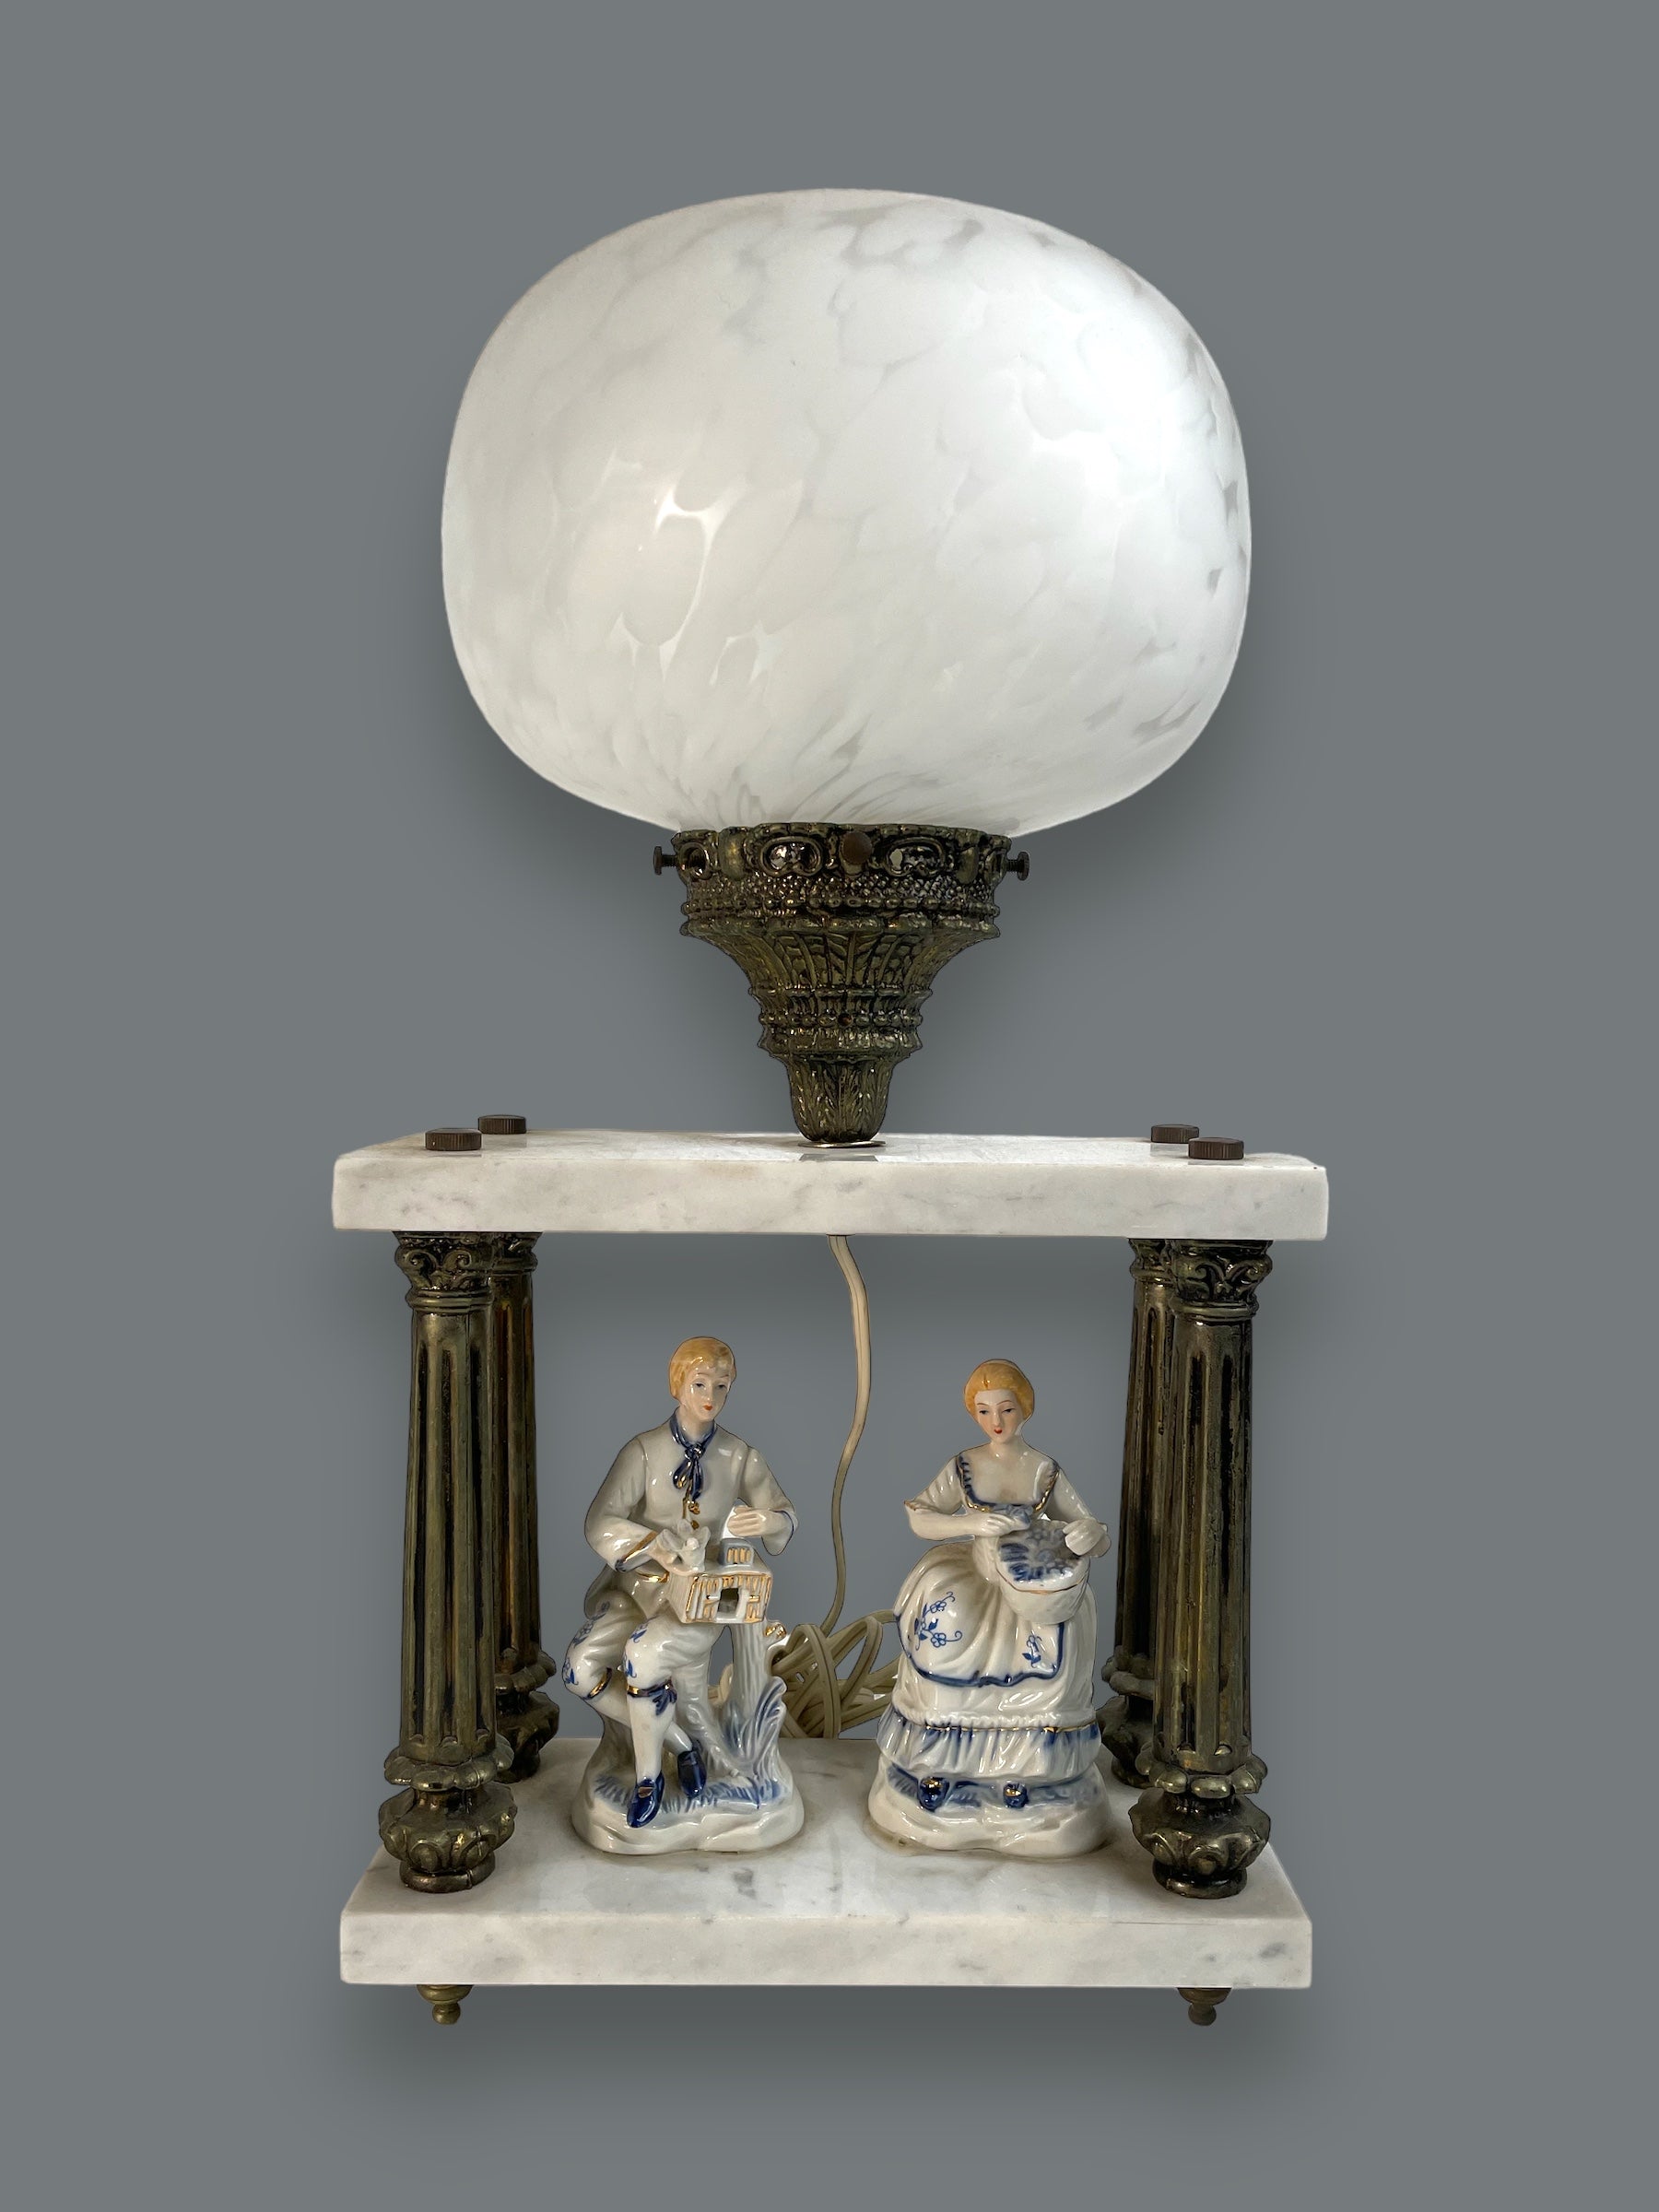 Vintage Murano Lamp featuring delicate Porcelain Collectible Figurines Marble Stand